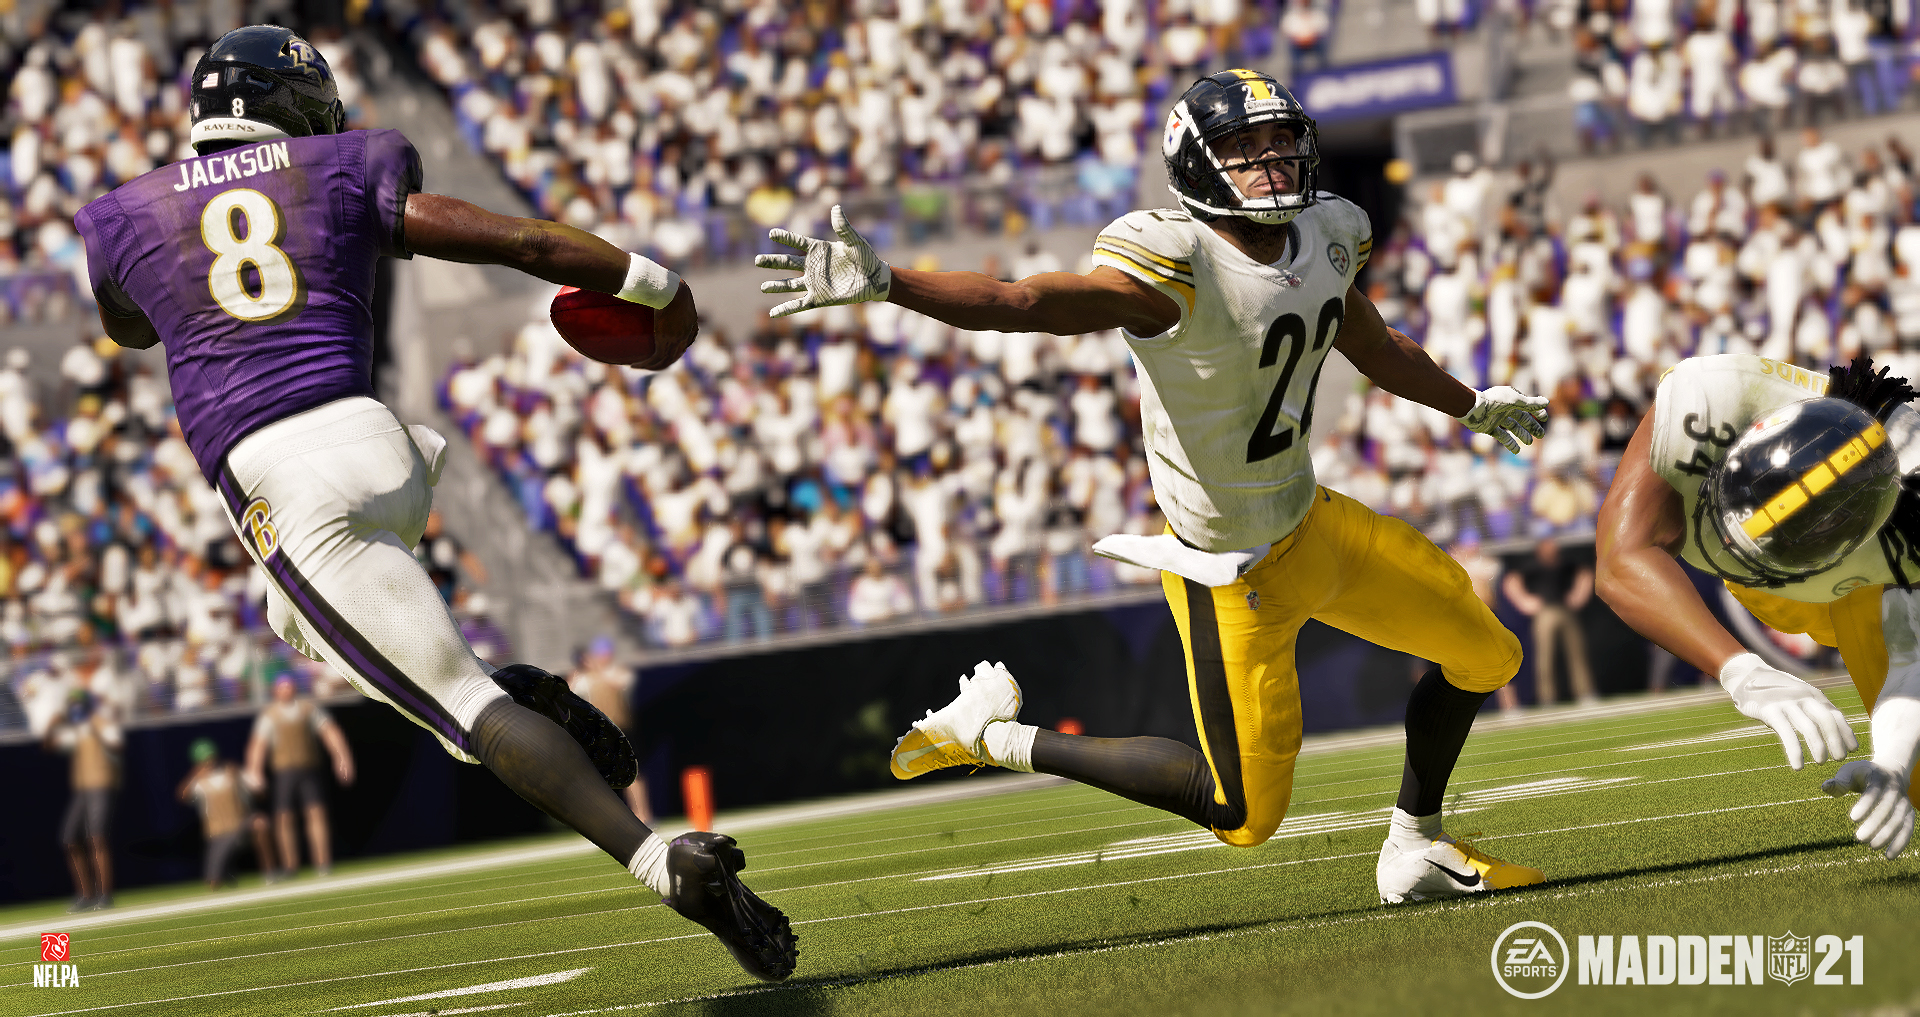 EA Showoffs The New "Complete Control" Mechanics In 'Madden NFL 21'